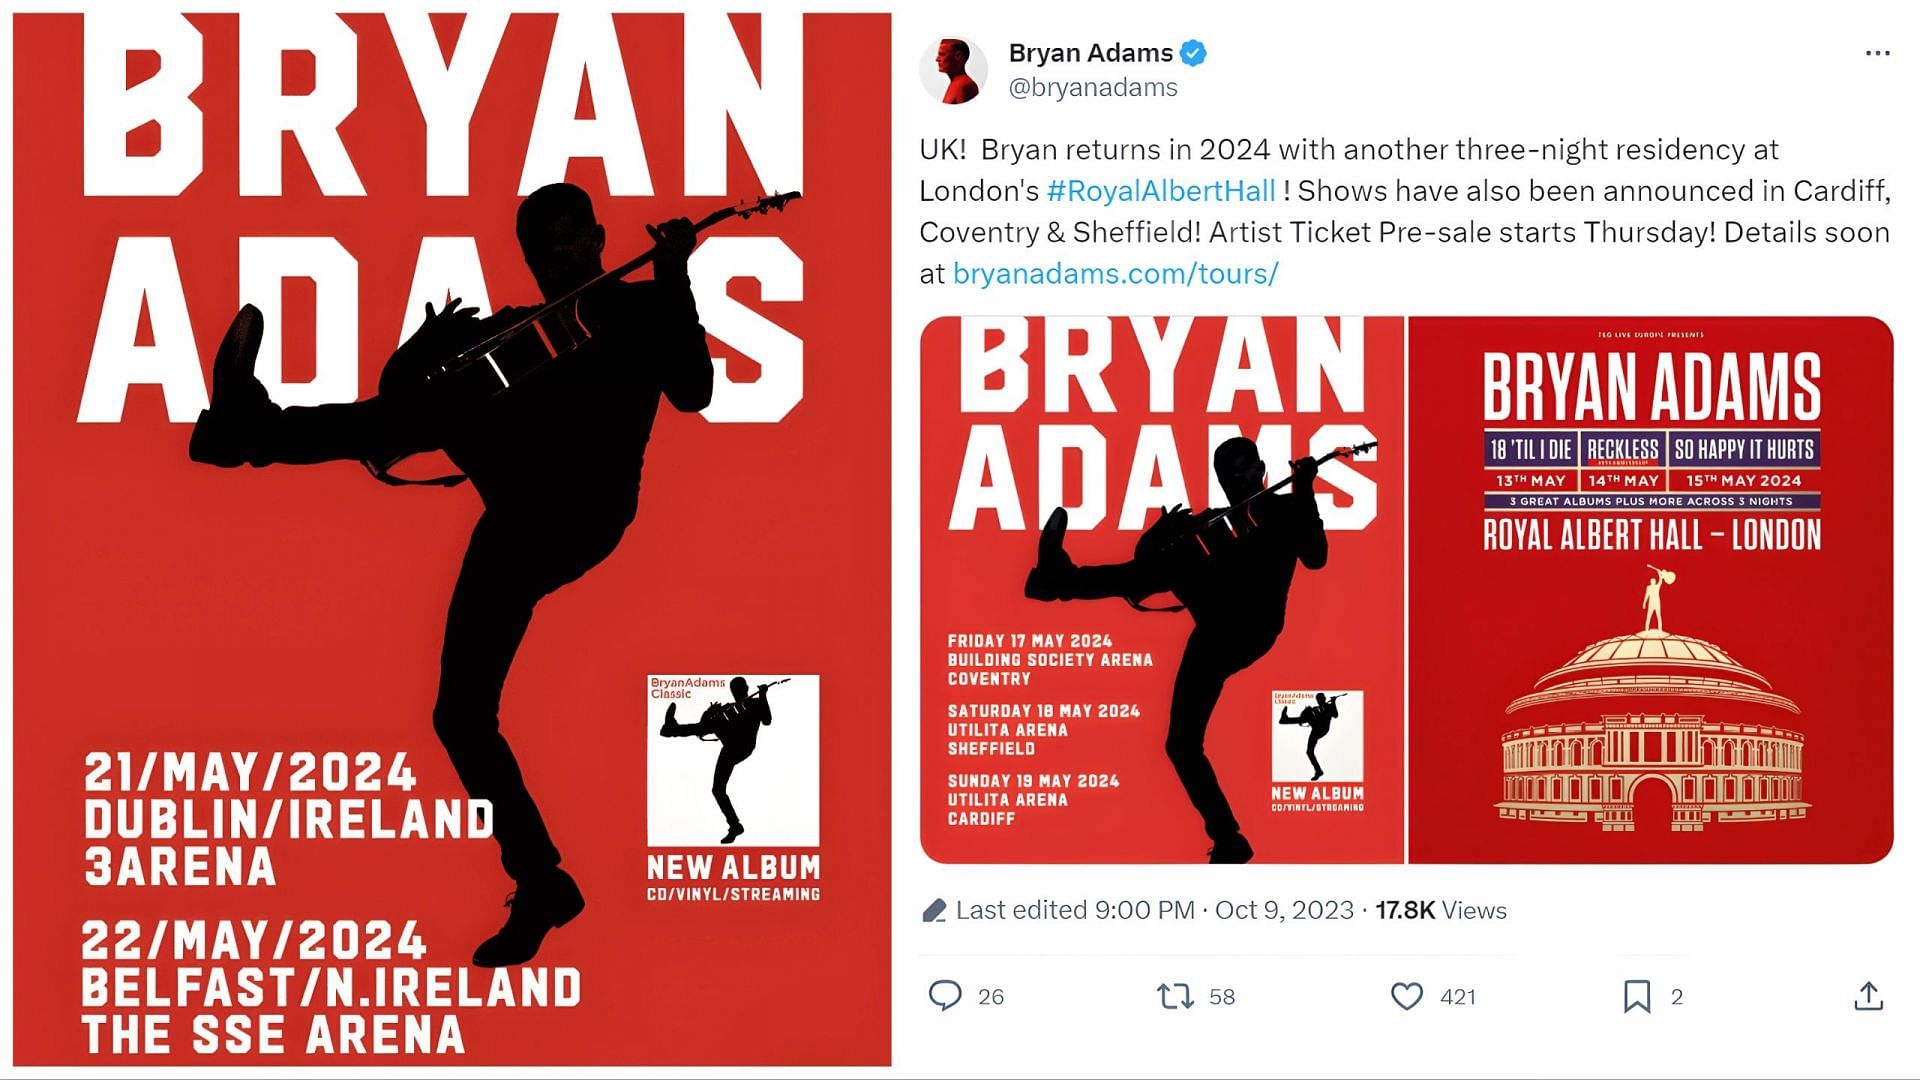 Bryan Adams UK and Ireland Tour + London Residency Announcement (Images via official Twitter @bryanadams)